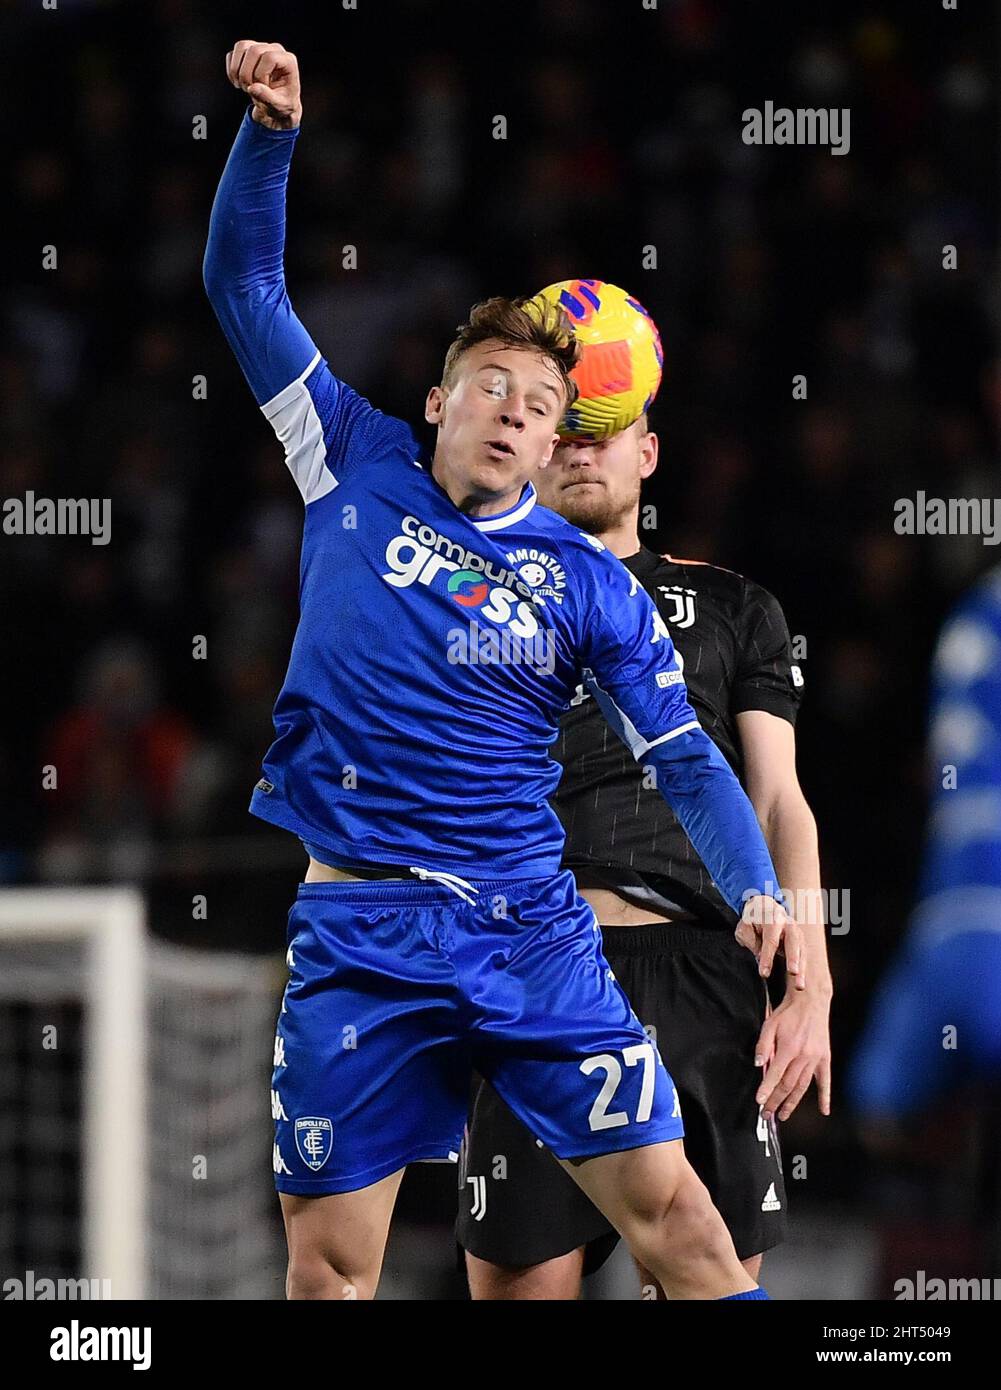 Empoli, Italy. 26th Feb, 2022. Juventus' Matthijs De Ligt (back) vies with Empoli's Szymon Zurkowski during a Serie A football match between Juventus and Empoli in Empoli, Italy, on Feb. 26, 2022. Credit: Federico Tardito/Xinhua/Alamy Live News Stock Photo